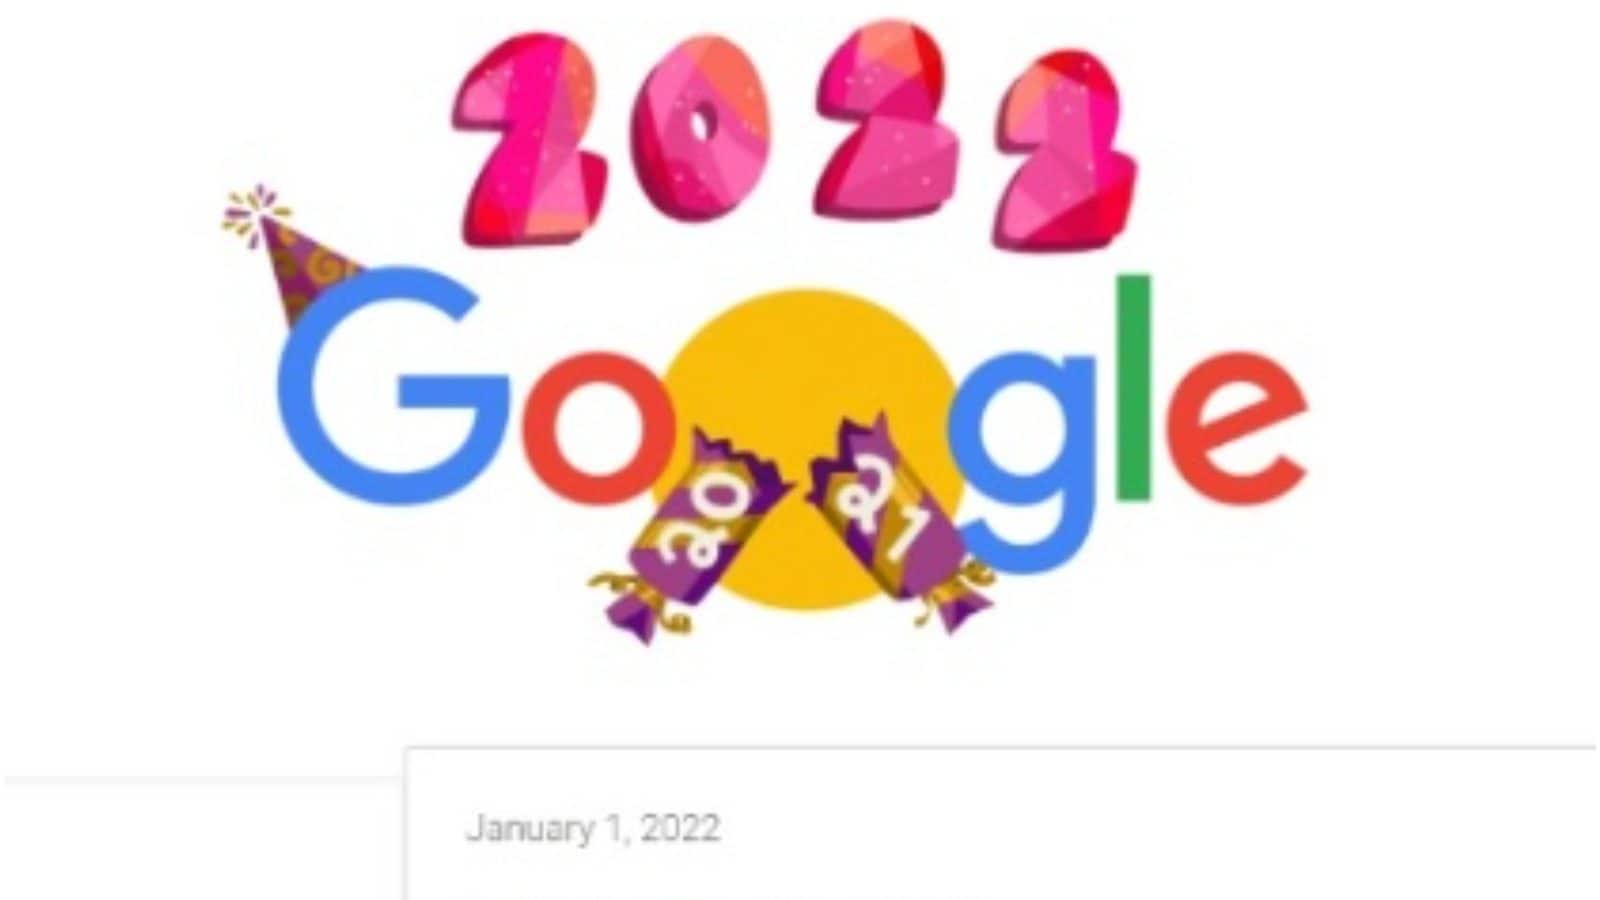 Google Doodle New Year 2022 with animated candy Bharat Times